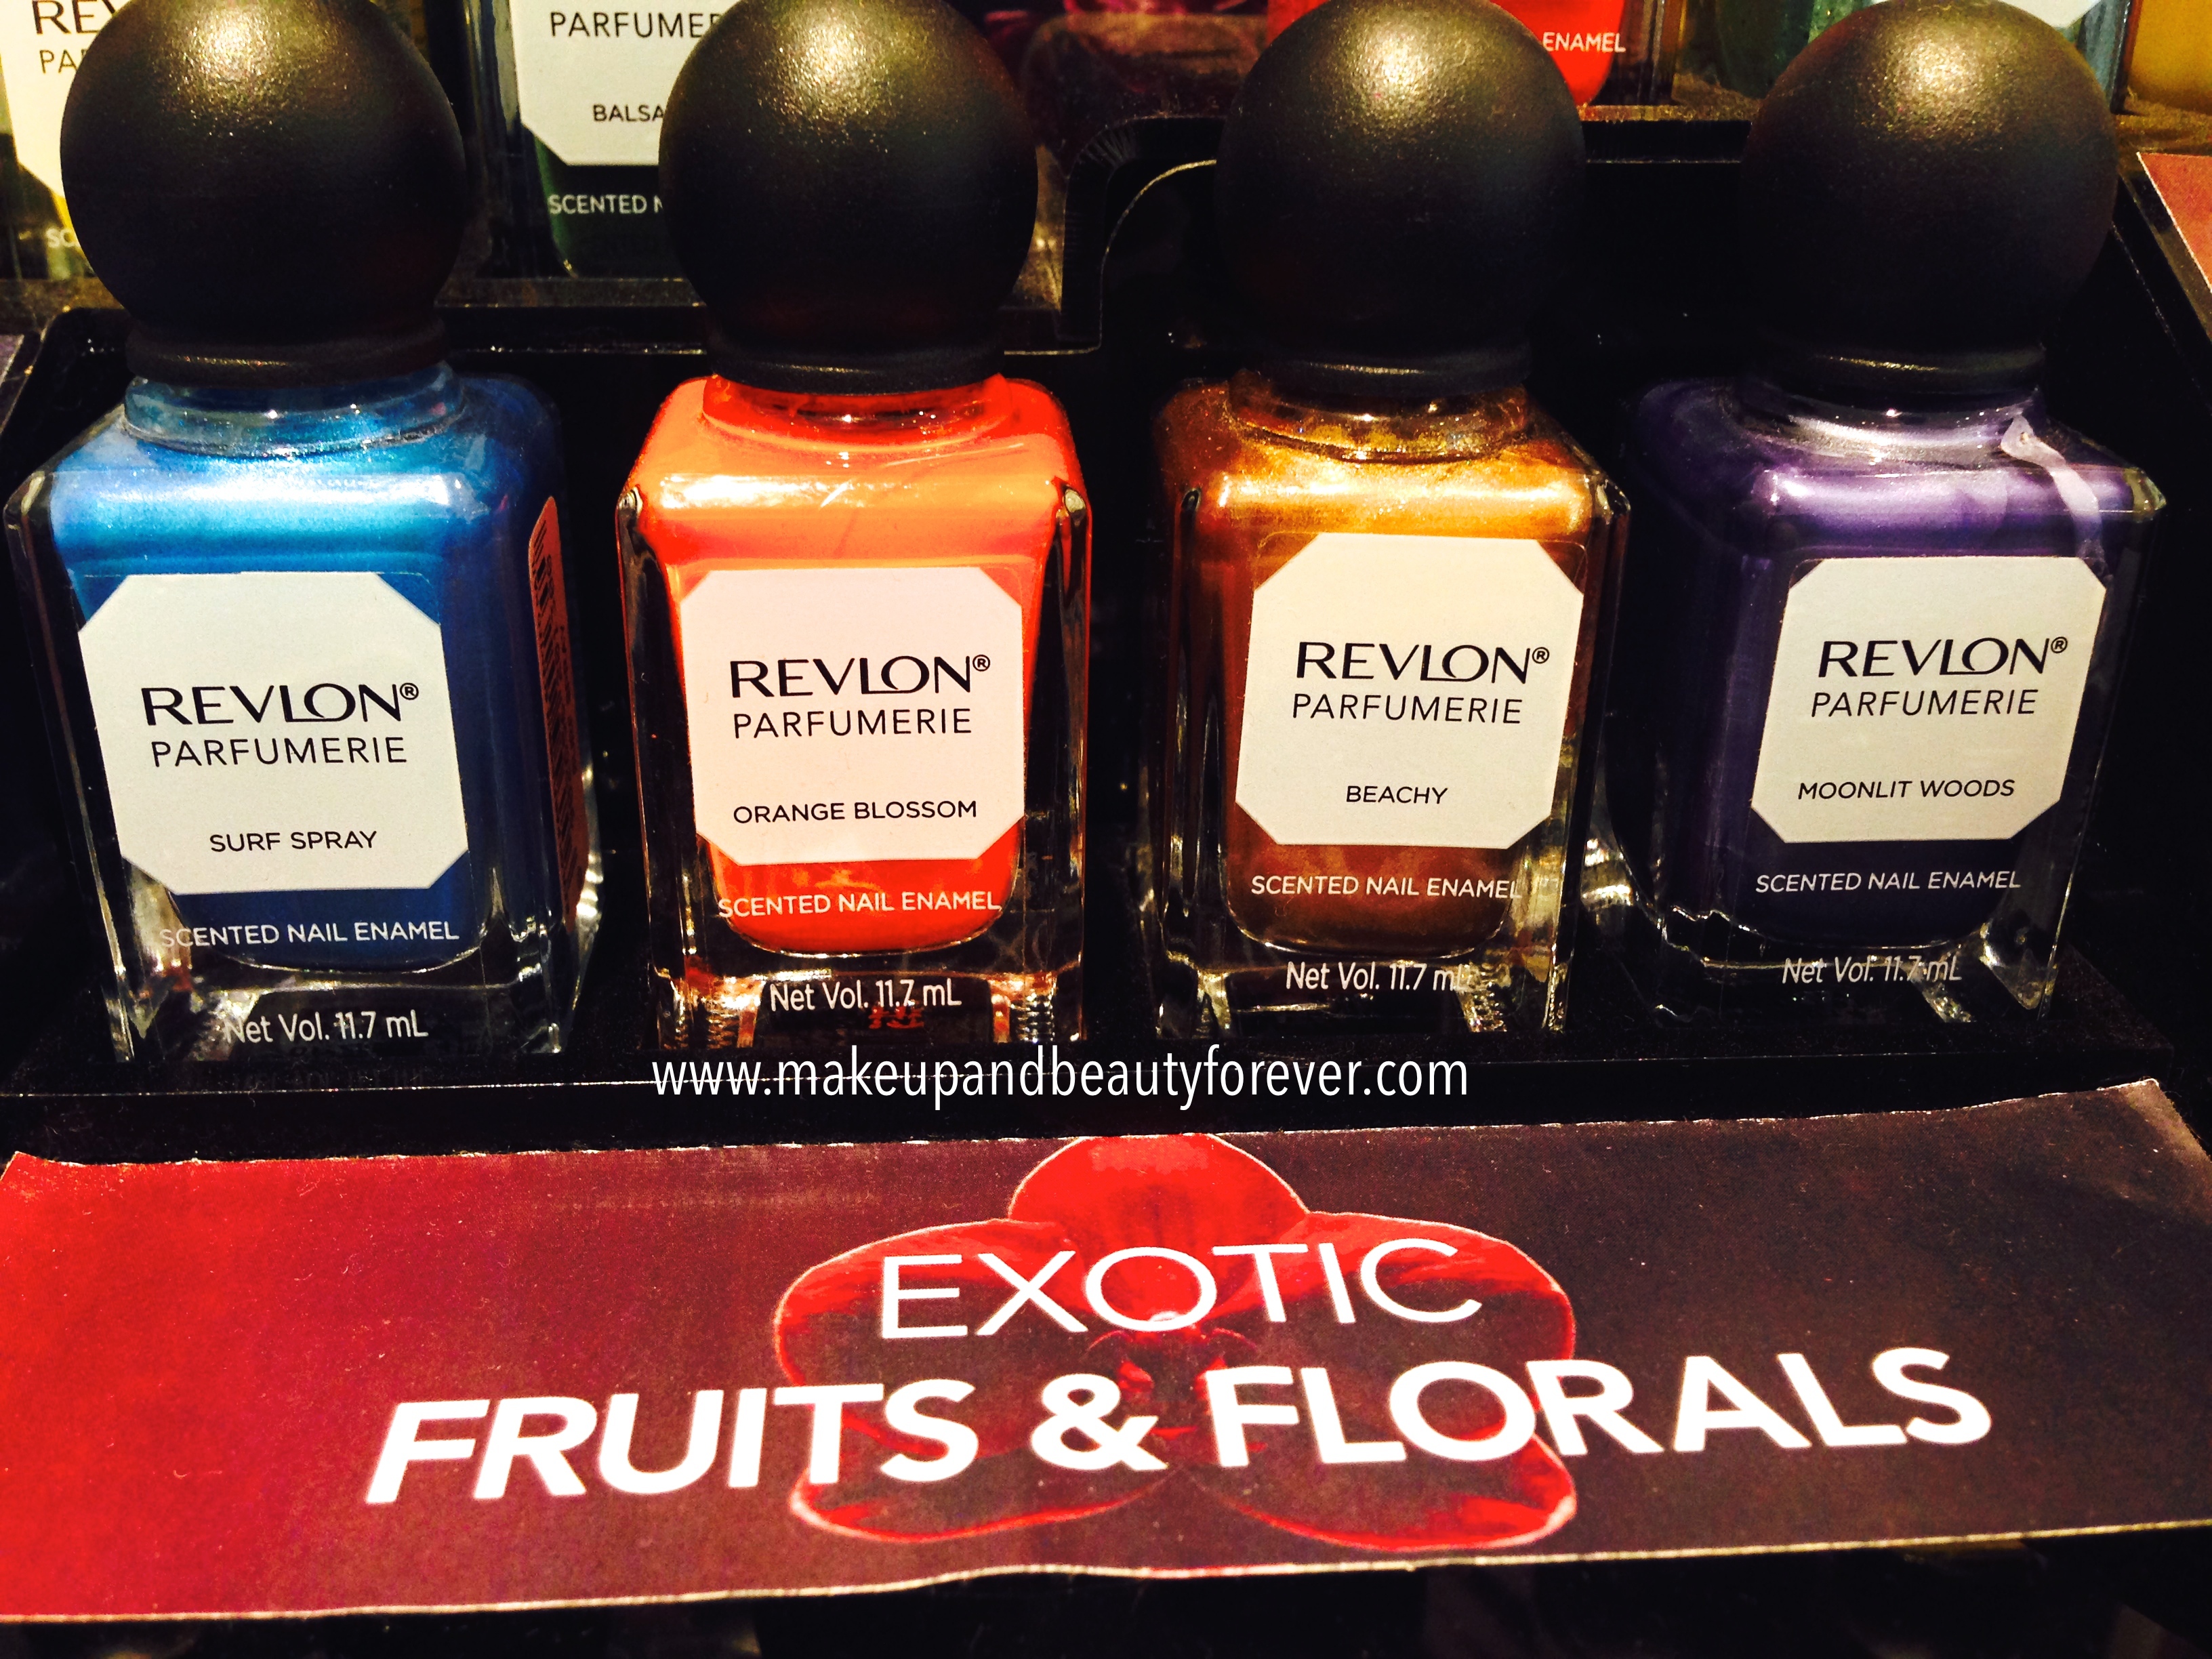 Revlon Parfumerie Scented Nail Enamel Shades, Price Details and Mini Review